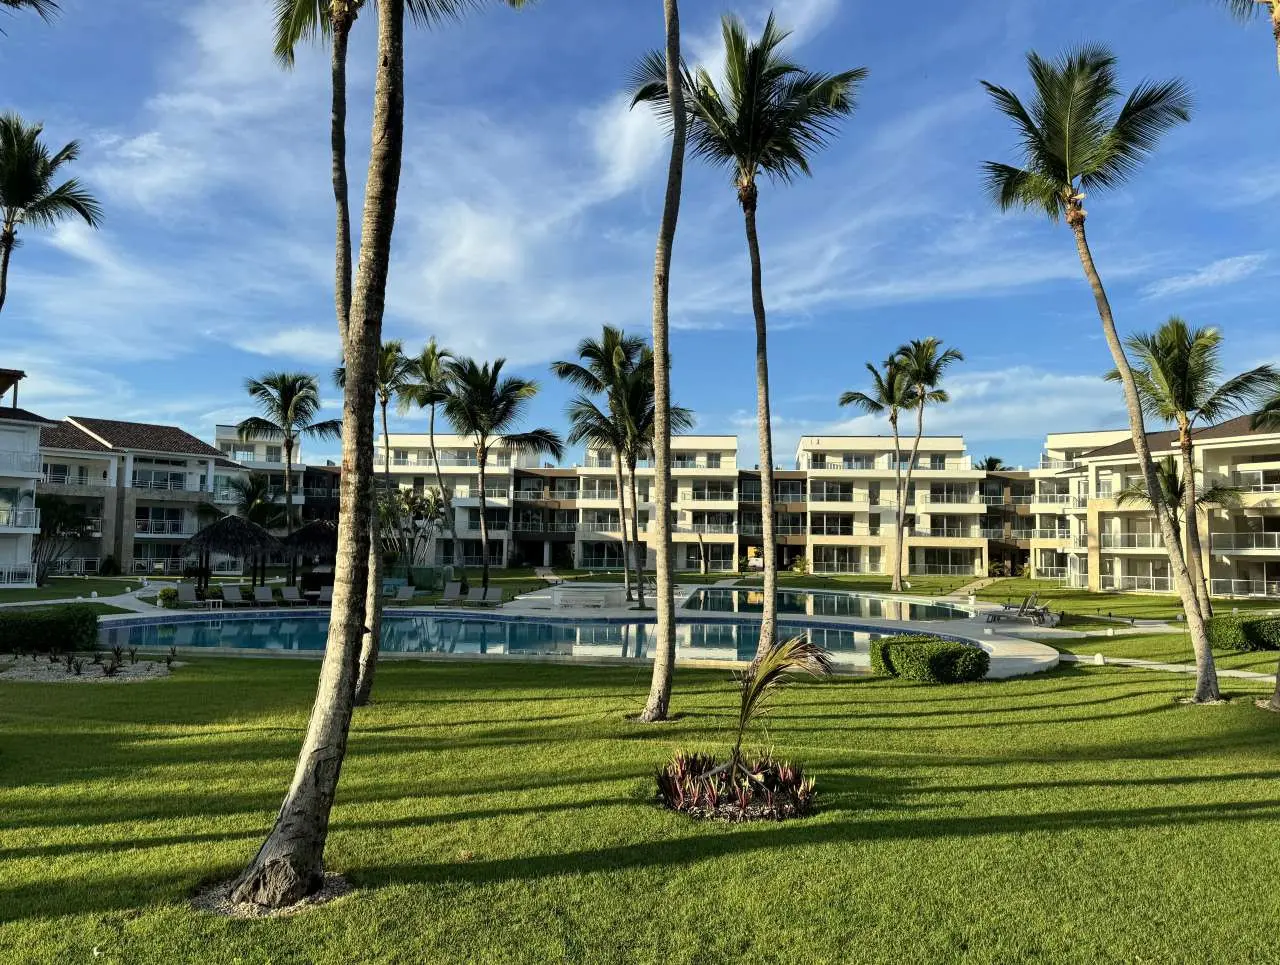 Morning view of Ocean View Apartments, pool, palm trees and green spaces